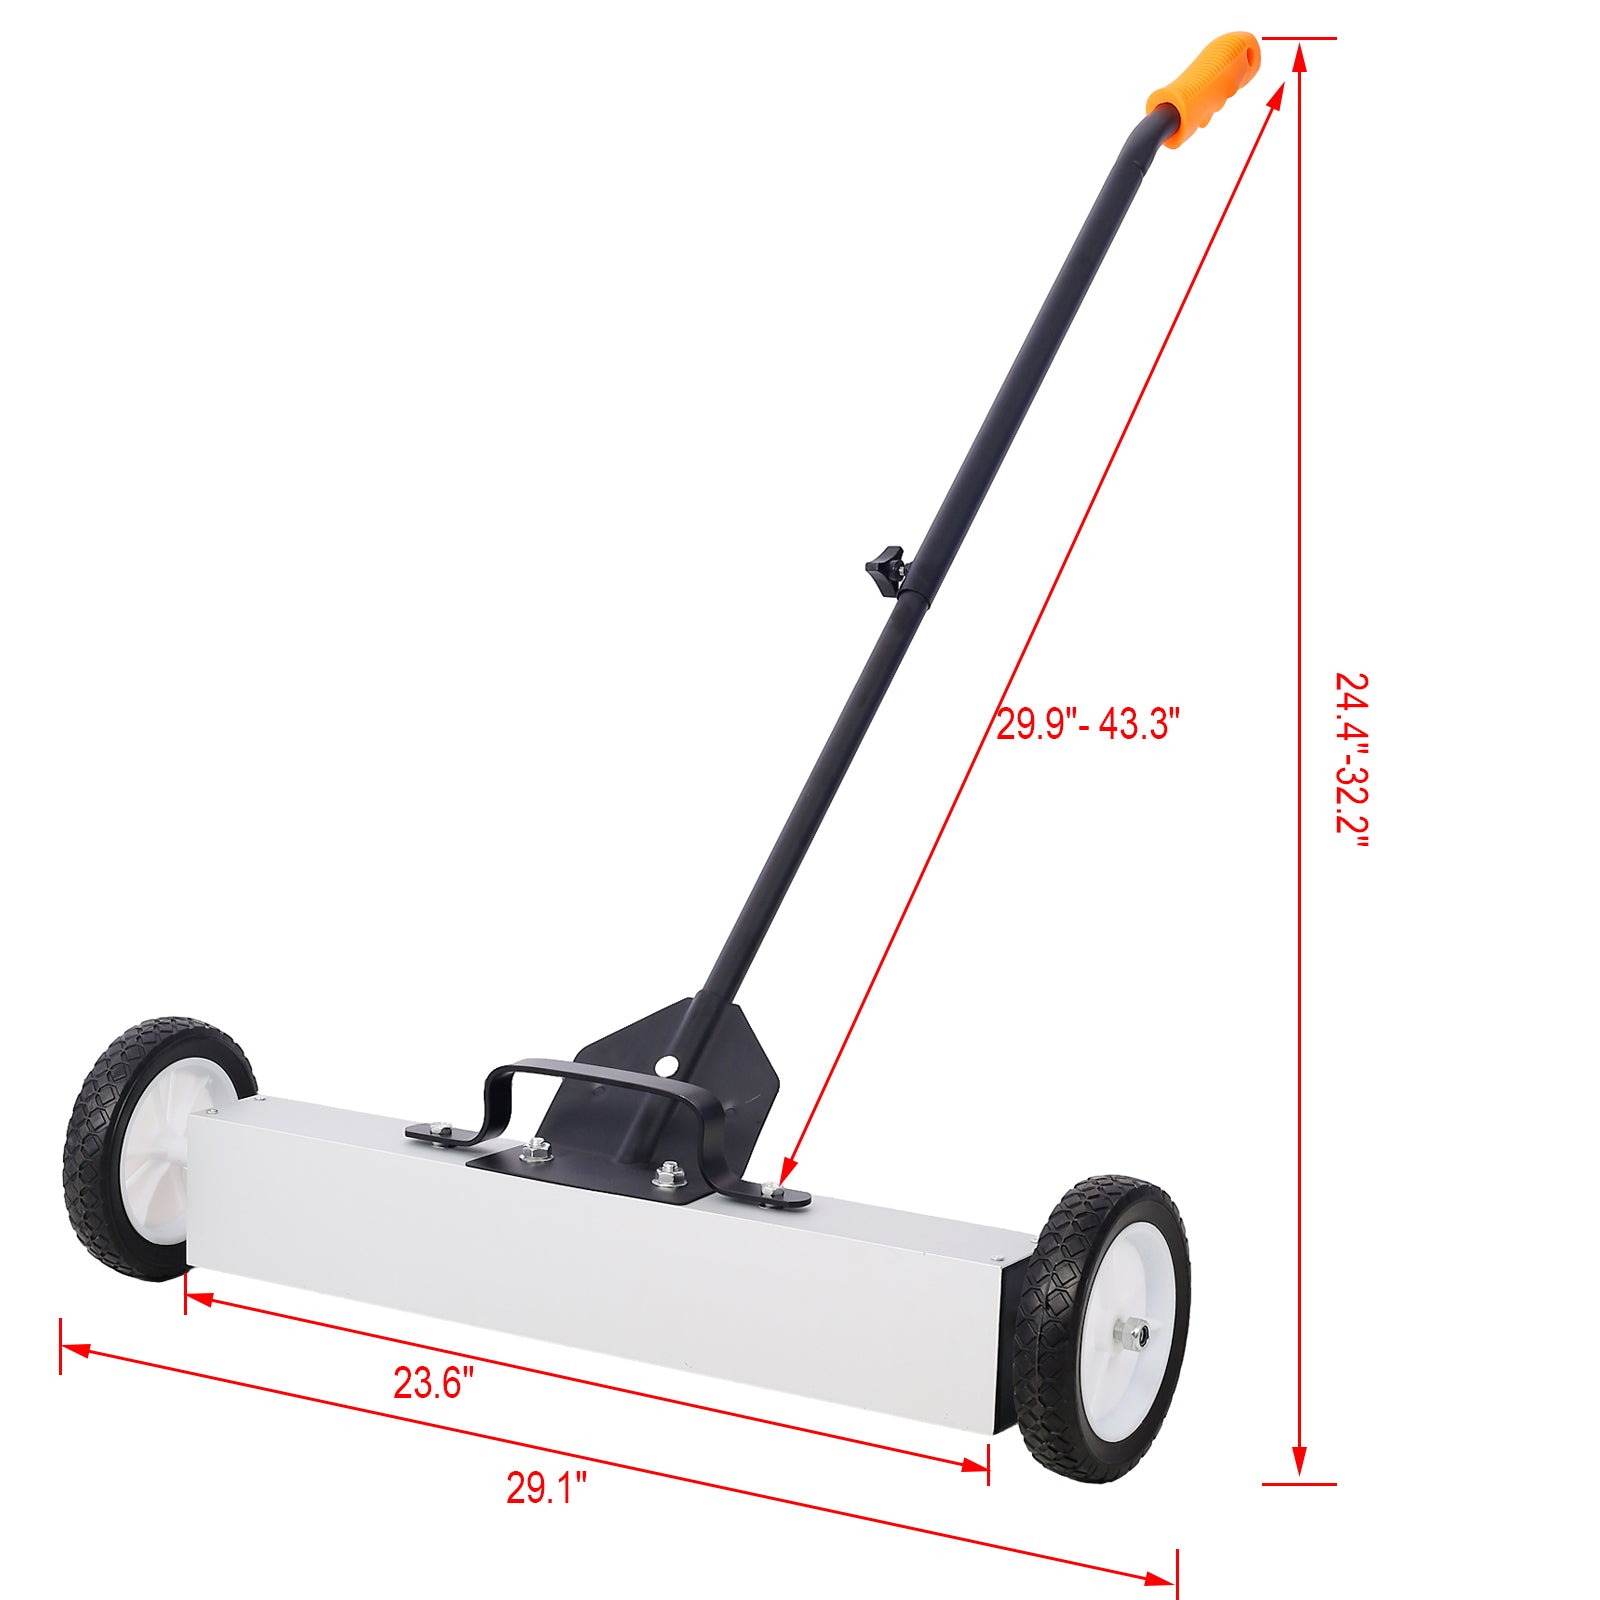 24'' Rolling Magnetic Pick-Up Sweeper, Heavy Duty Push-Type with Release, for Nails Needles Screws Collection,30 Pound Capacity - Tonkn